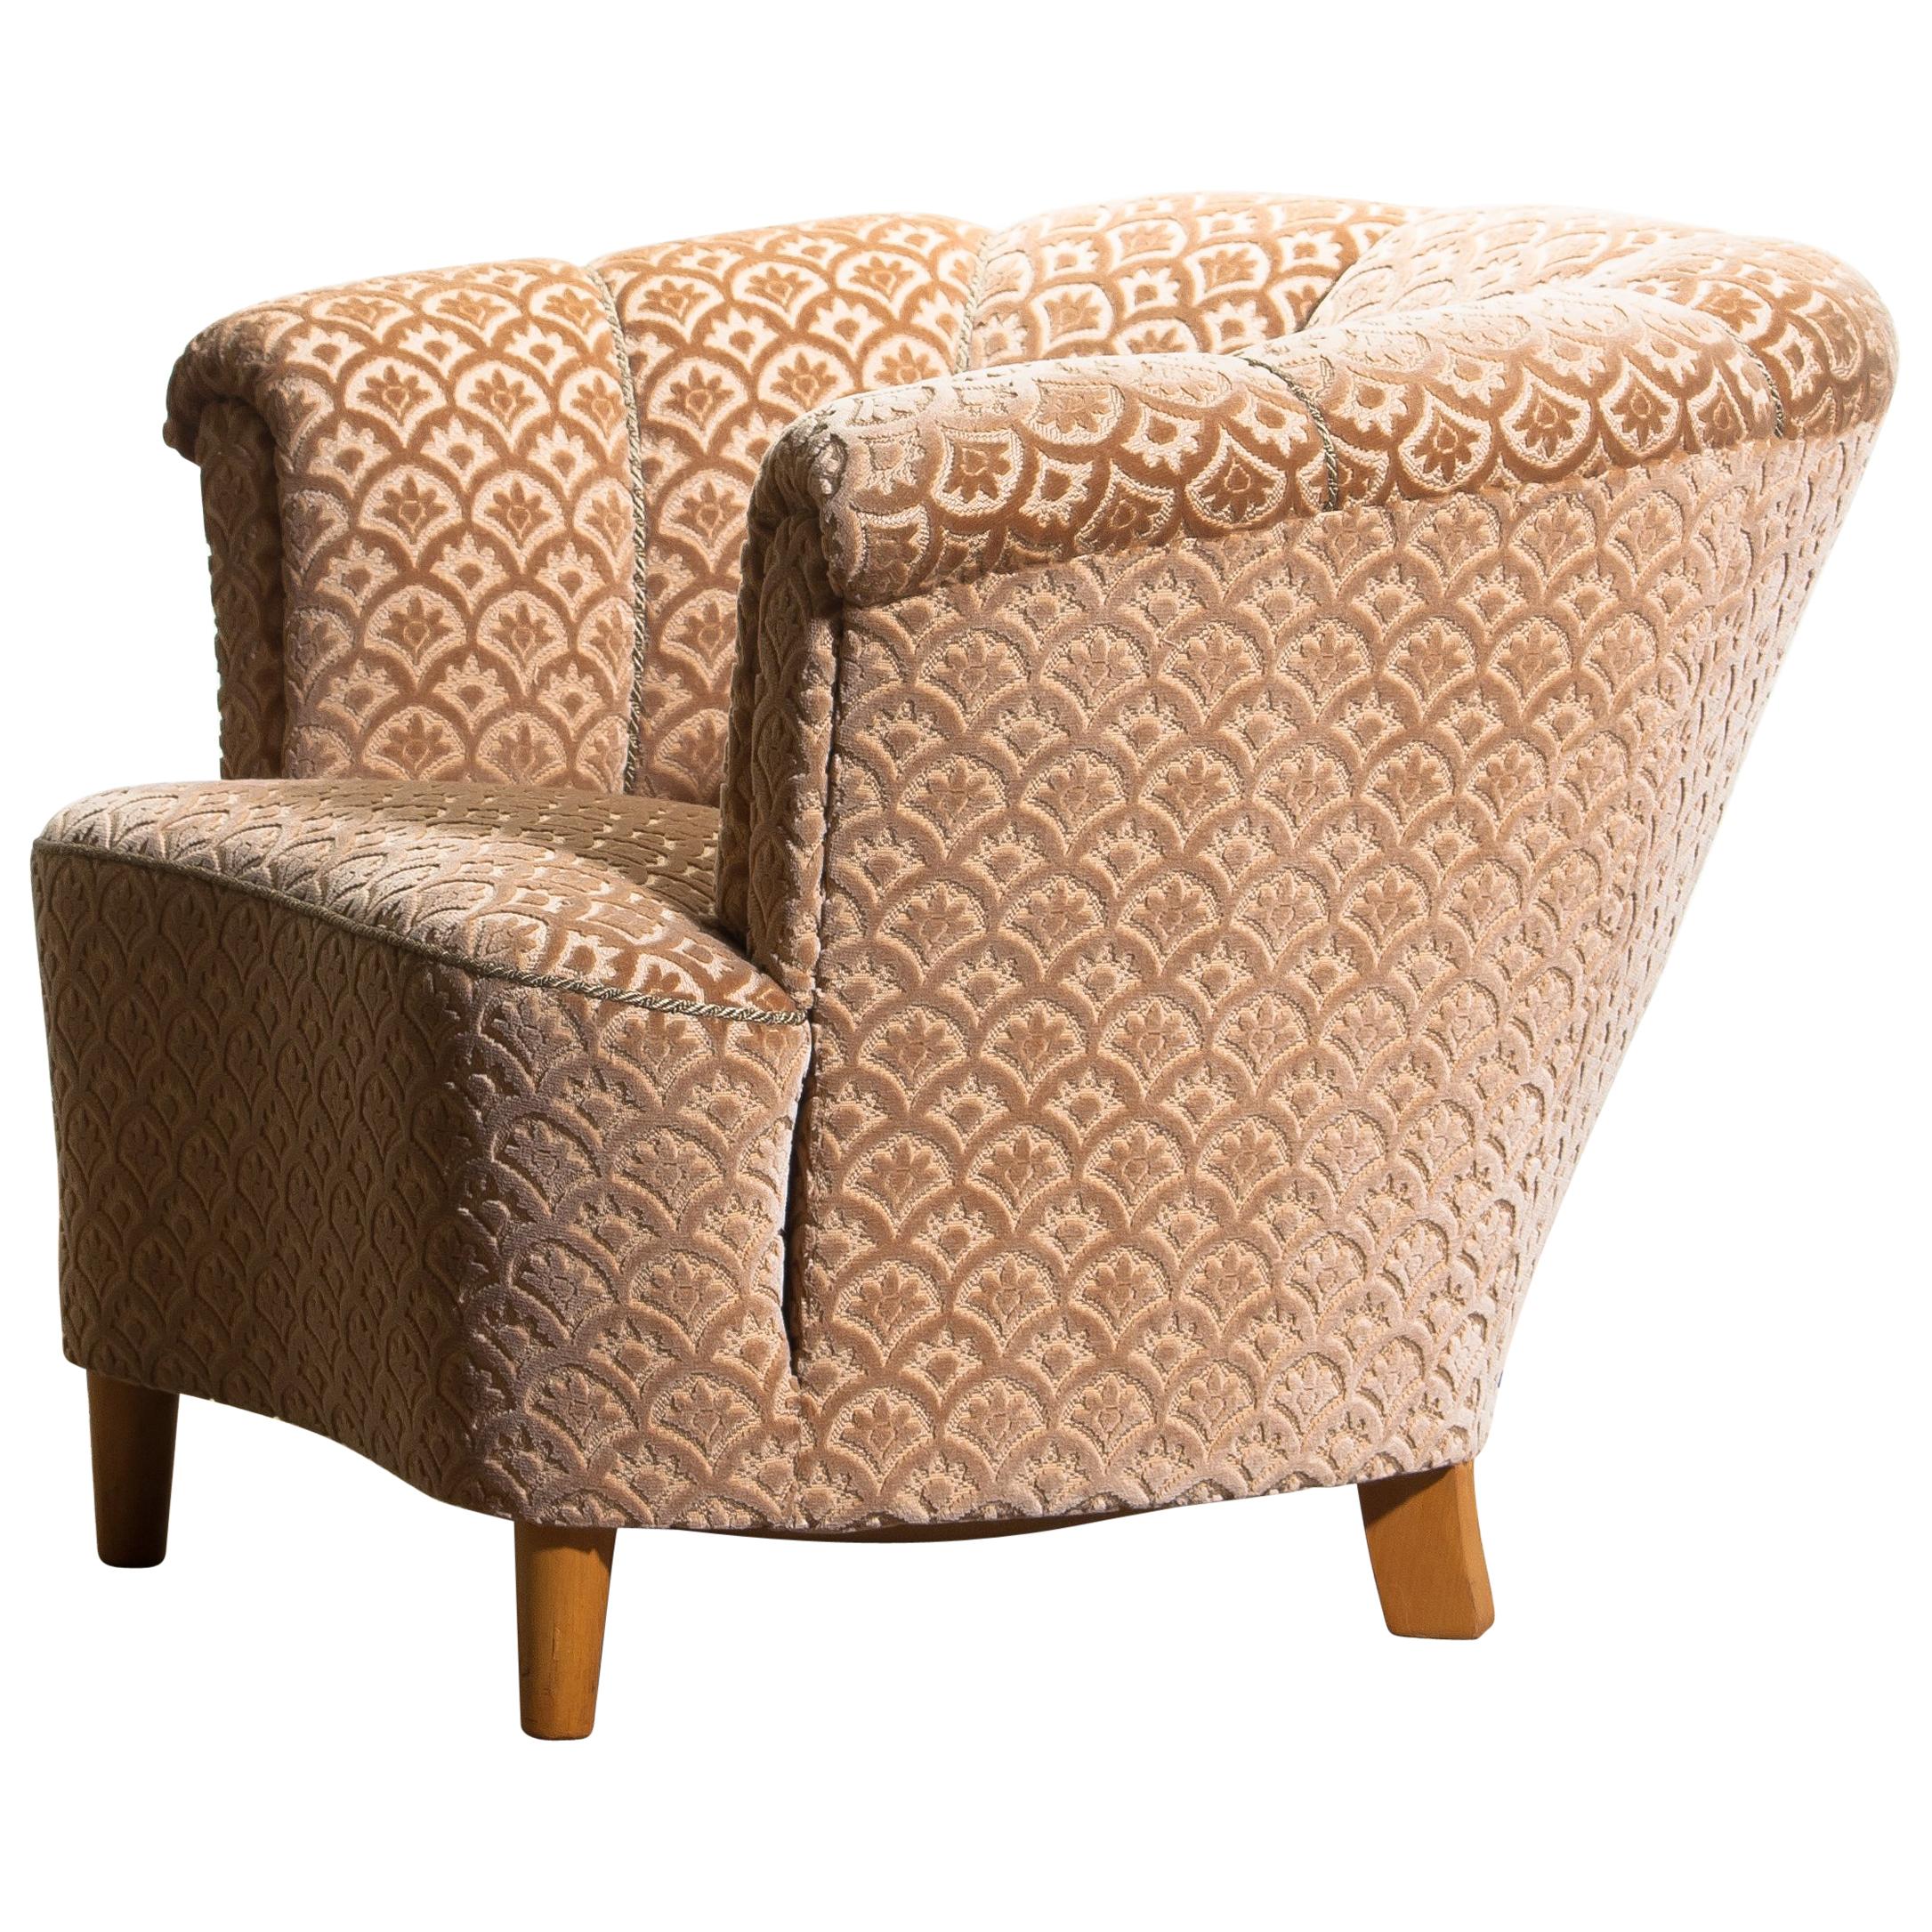 Swedish 1940s, Velvet Jacquard Club Lounge Cocktail Chair from Sweden